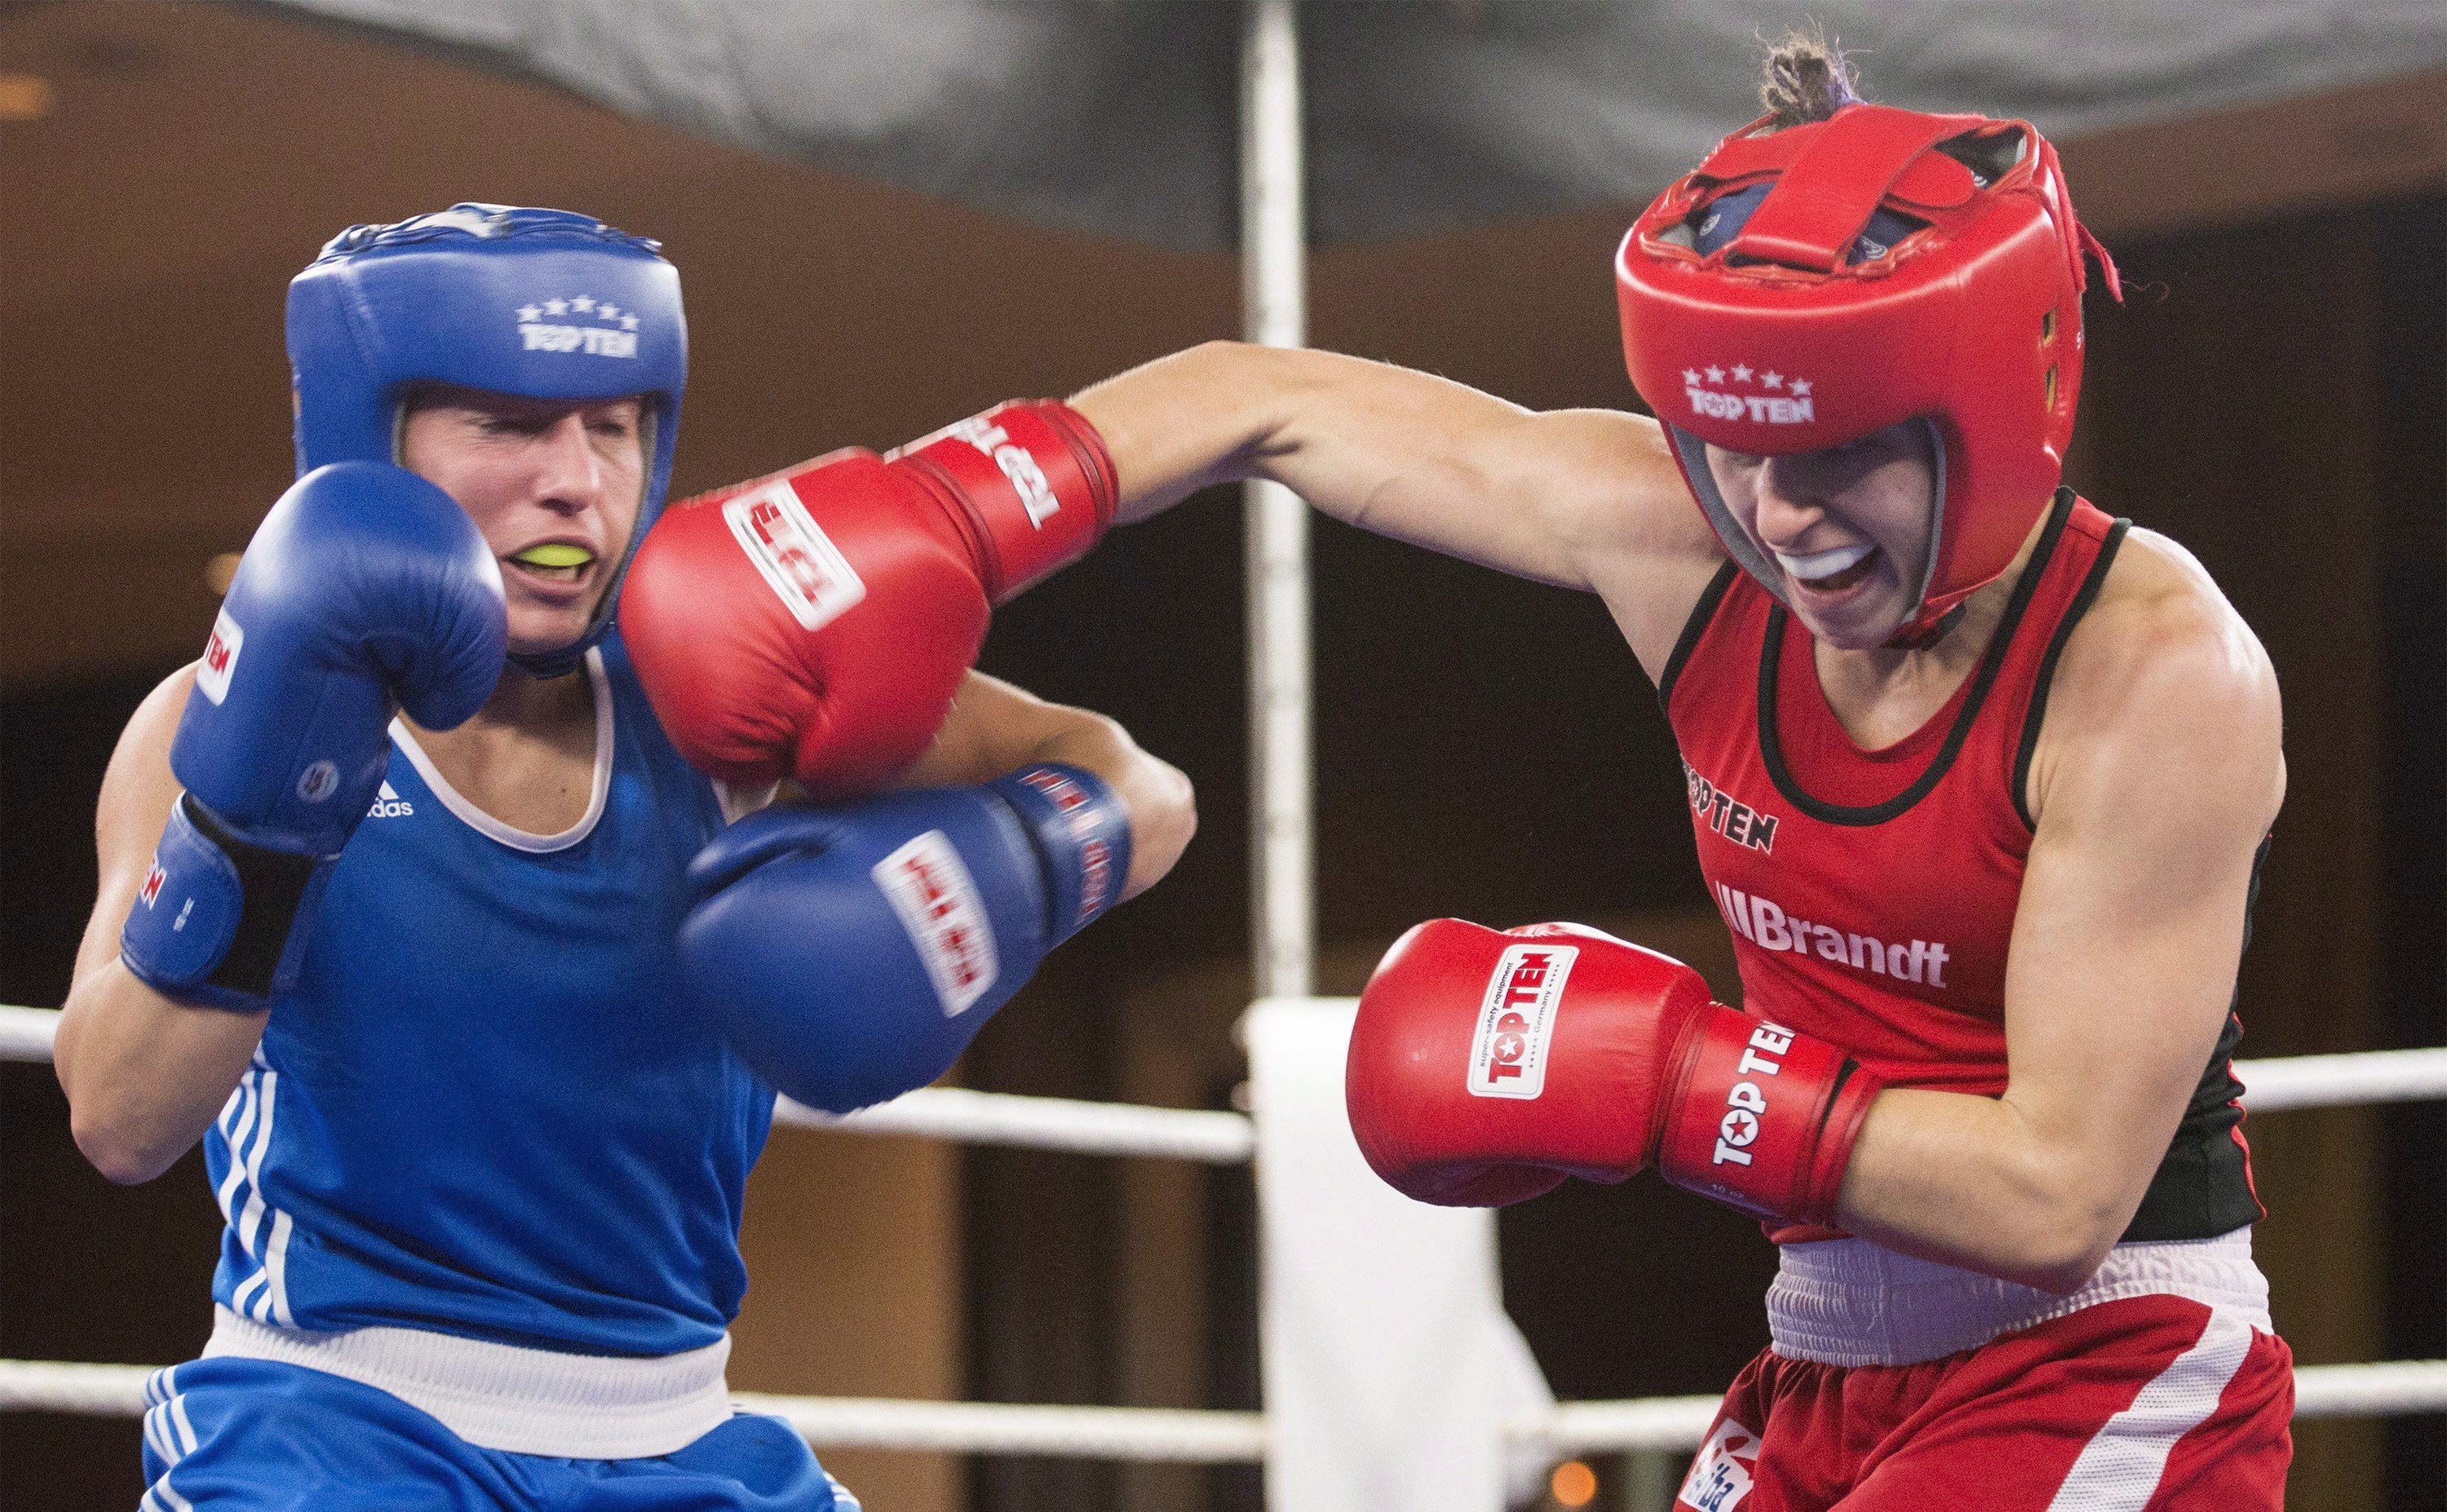 Canadian boxers call for resignation of top official, investigation into toxic culture